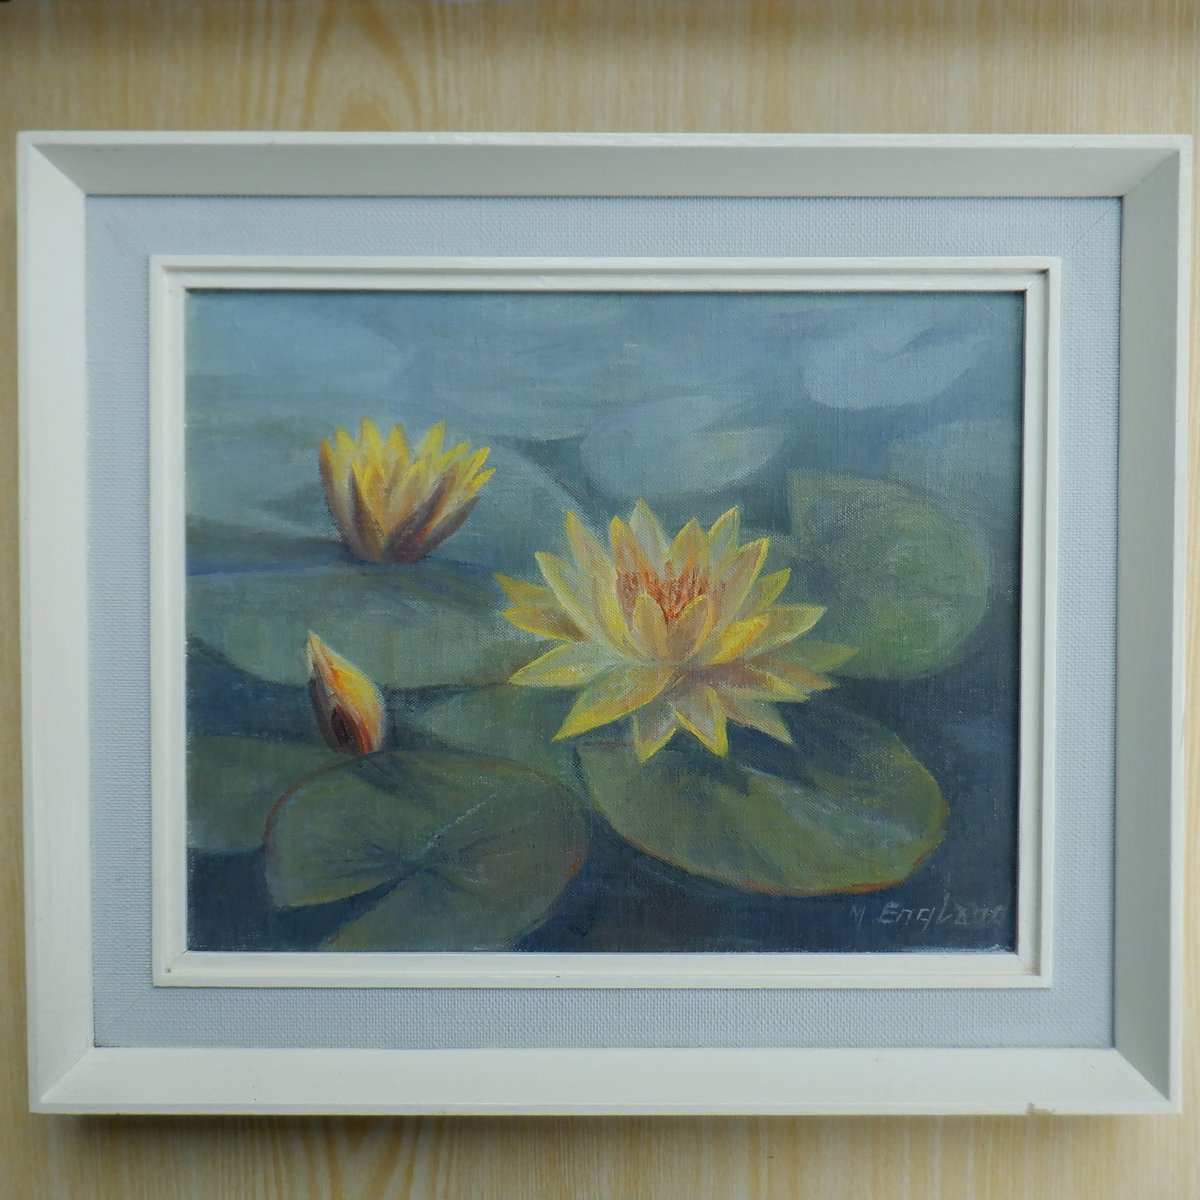 A still life painting of Water Lily Sunrise by Muriel England FRSA. The frame measures 28 cm x 33 cm.👩‍🎨🎨 🛒 ebay.co.uk/itm/2355170399… #Art #FloralArt #FRSA #WaterLily #WaterLilySunrise #MurielEngland #Vintage #FollowVintage #eBay